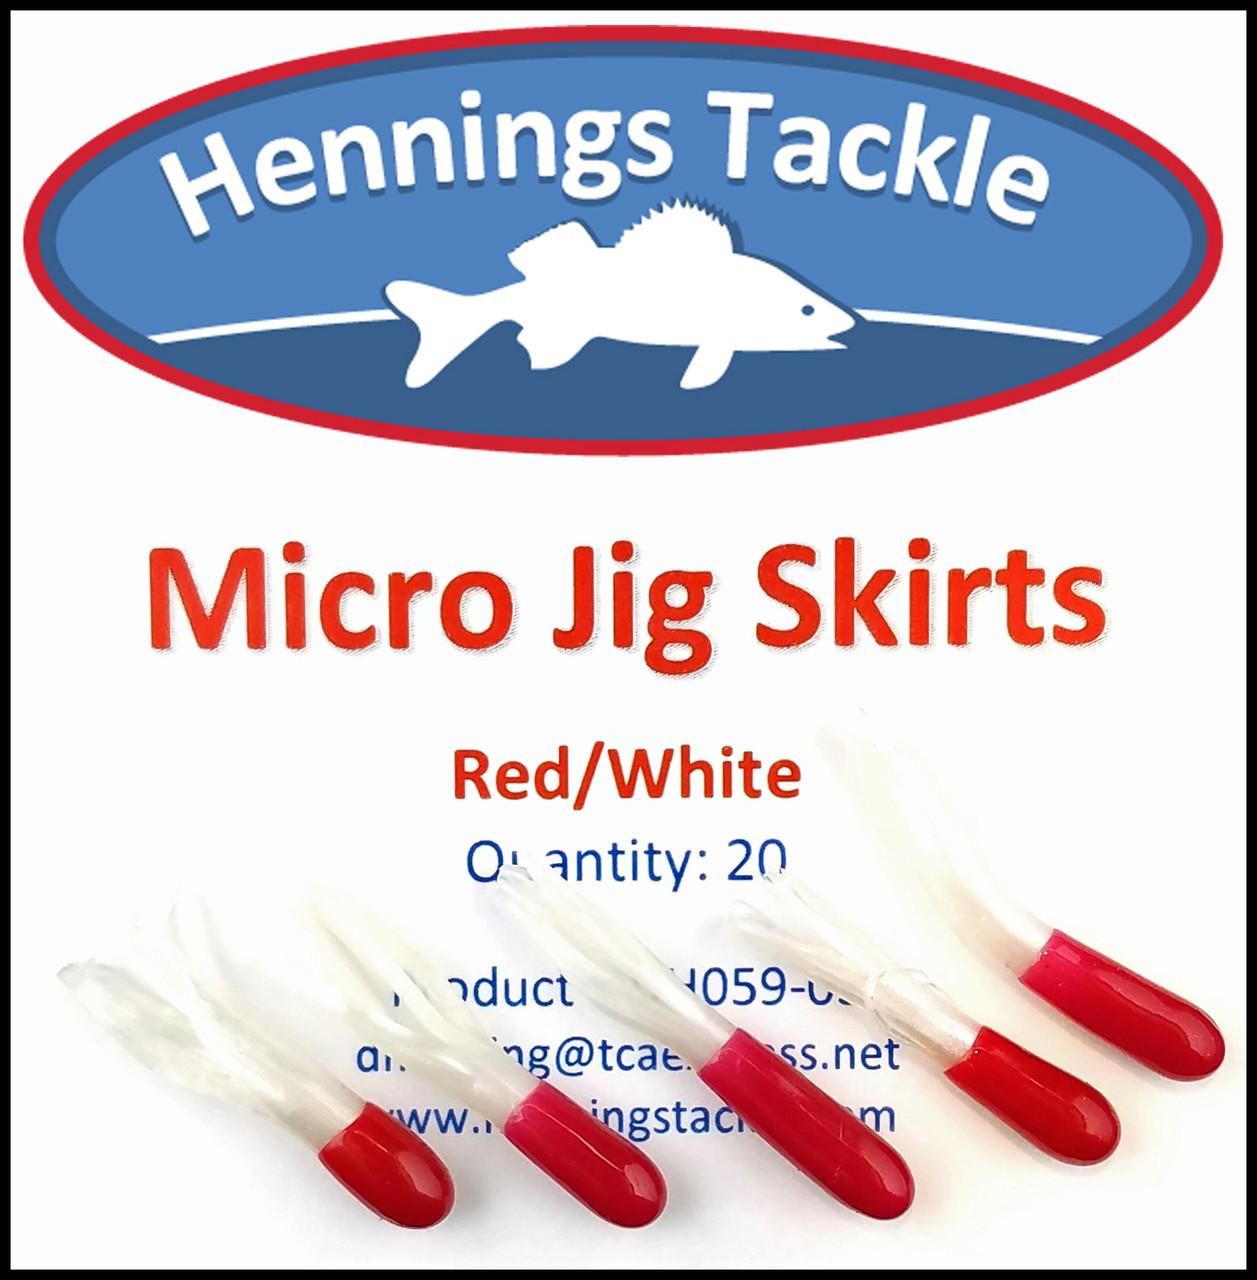 Micro Jig Skirts - Red/White - Henning's Tackle